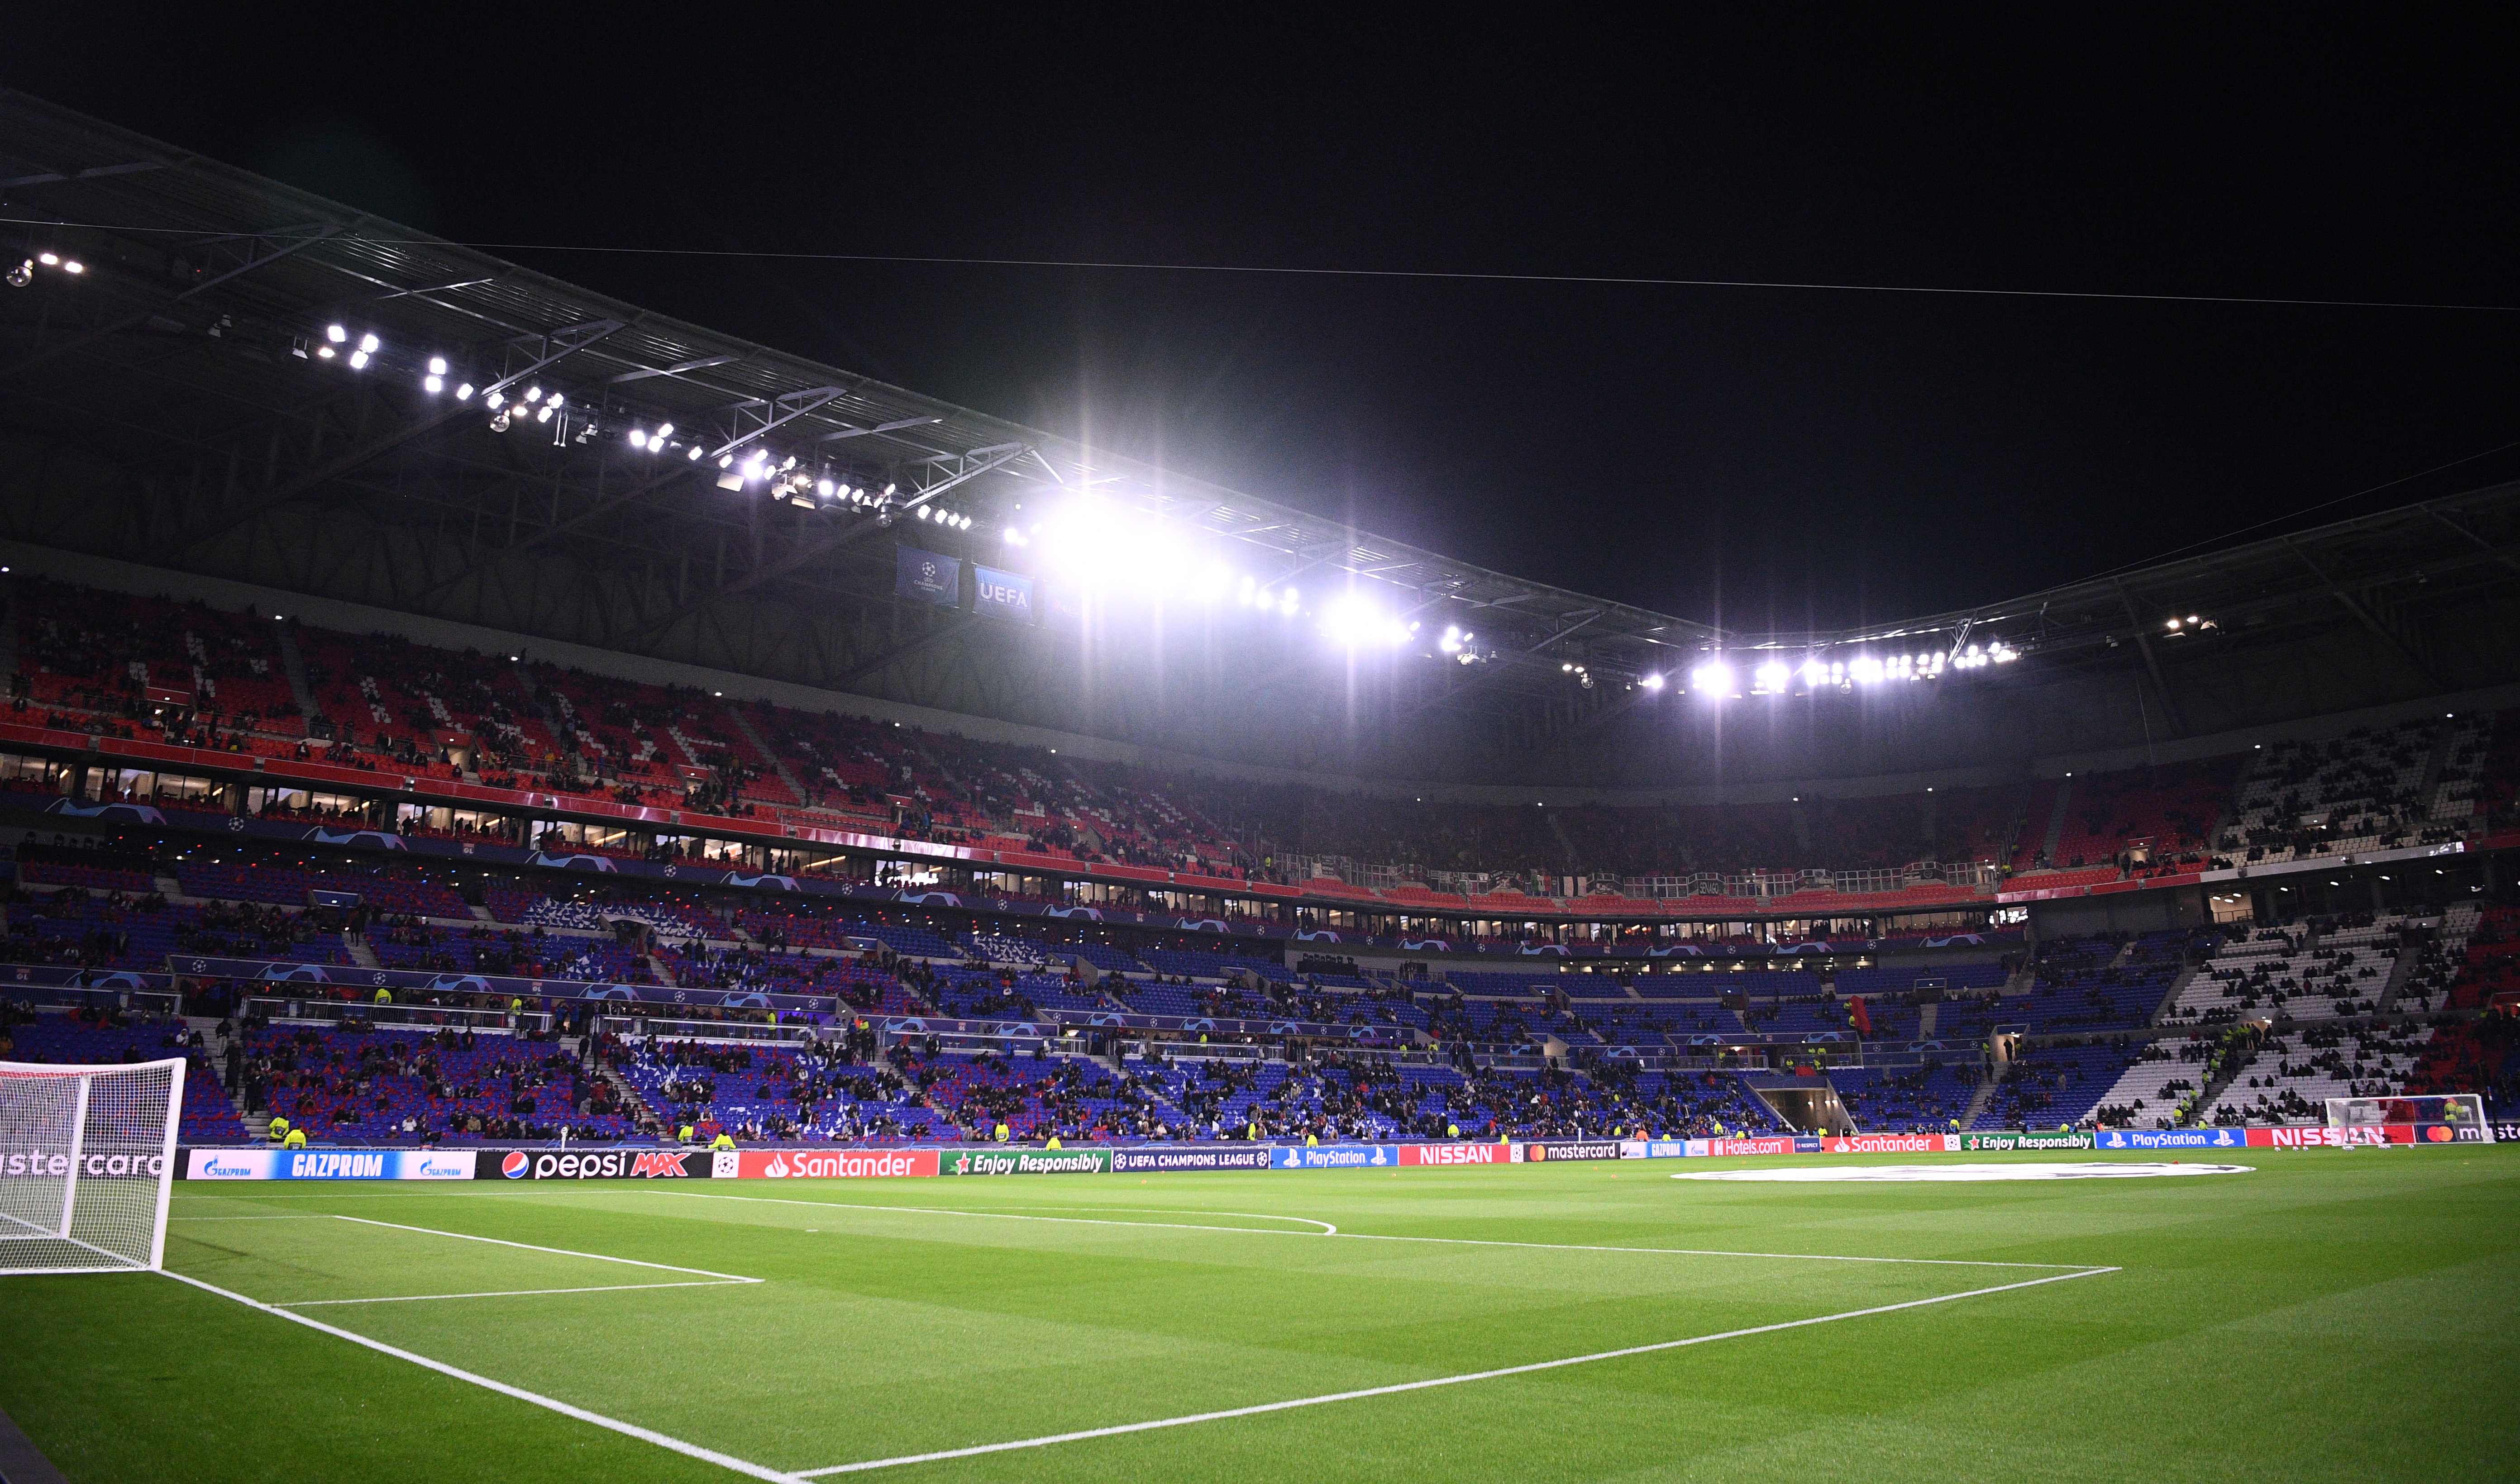 This picture taken on February 26, 2020 shows the Parc Olympique Lyonnais stadium in Decines-Charpieu prior the UEFA Champions League round of 16 first-leg football match between Lyon and Juventus, on February 26, 2020. (Photo by FRANCK FIFE / AFP)